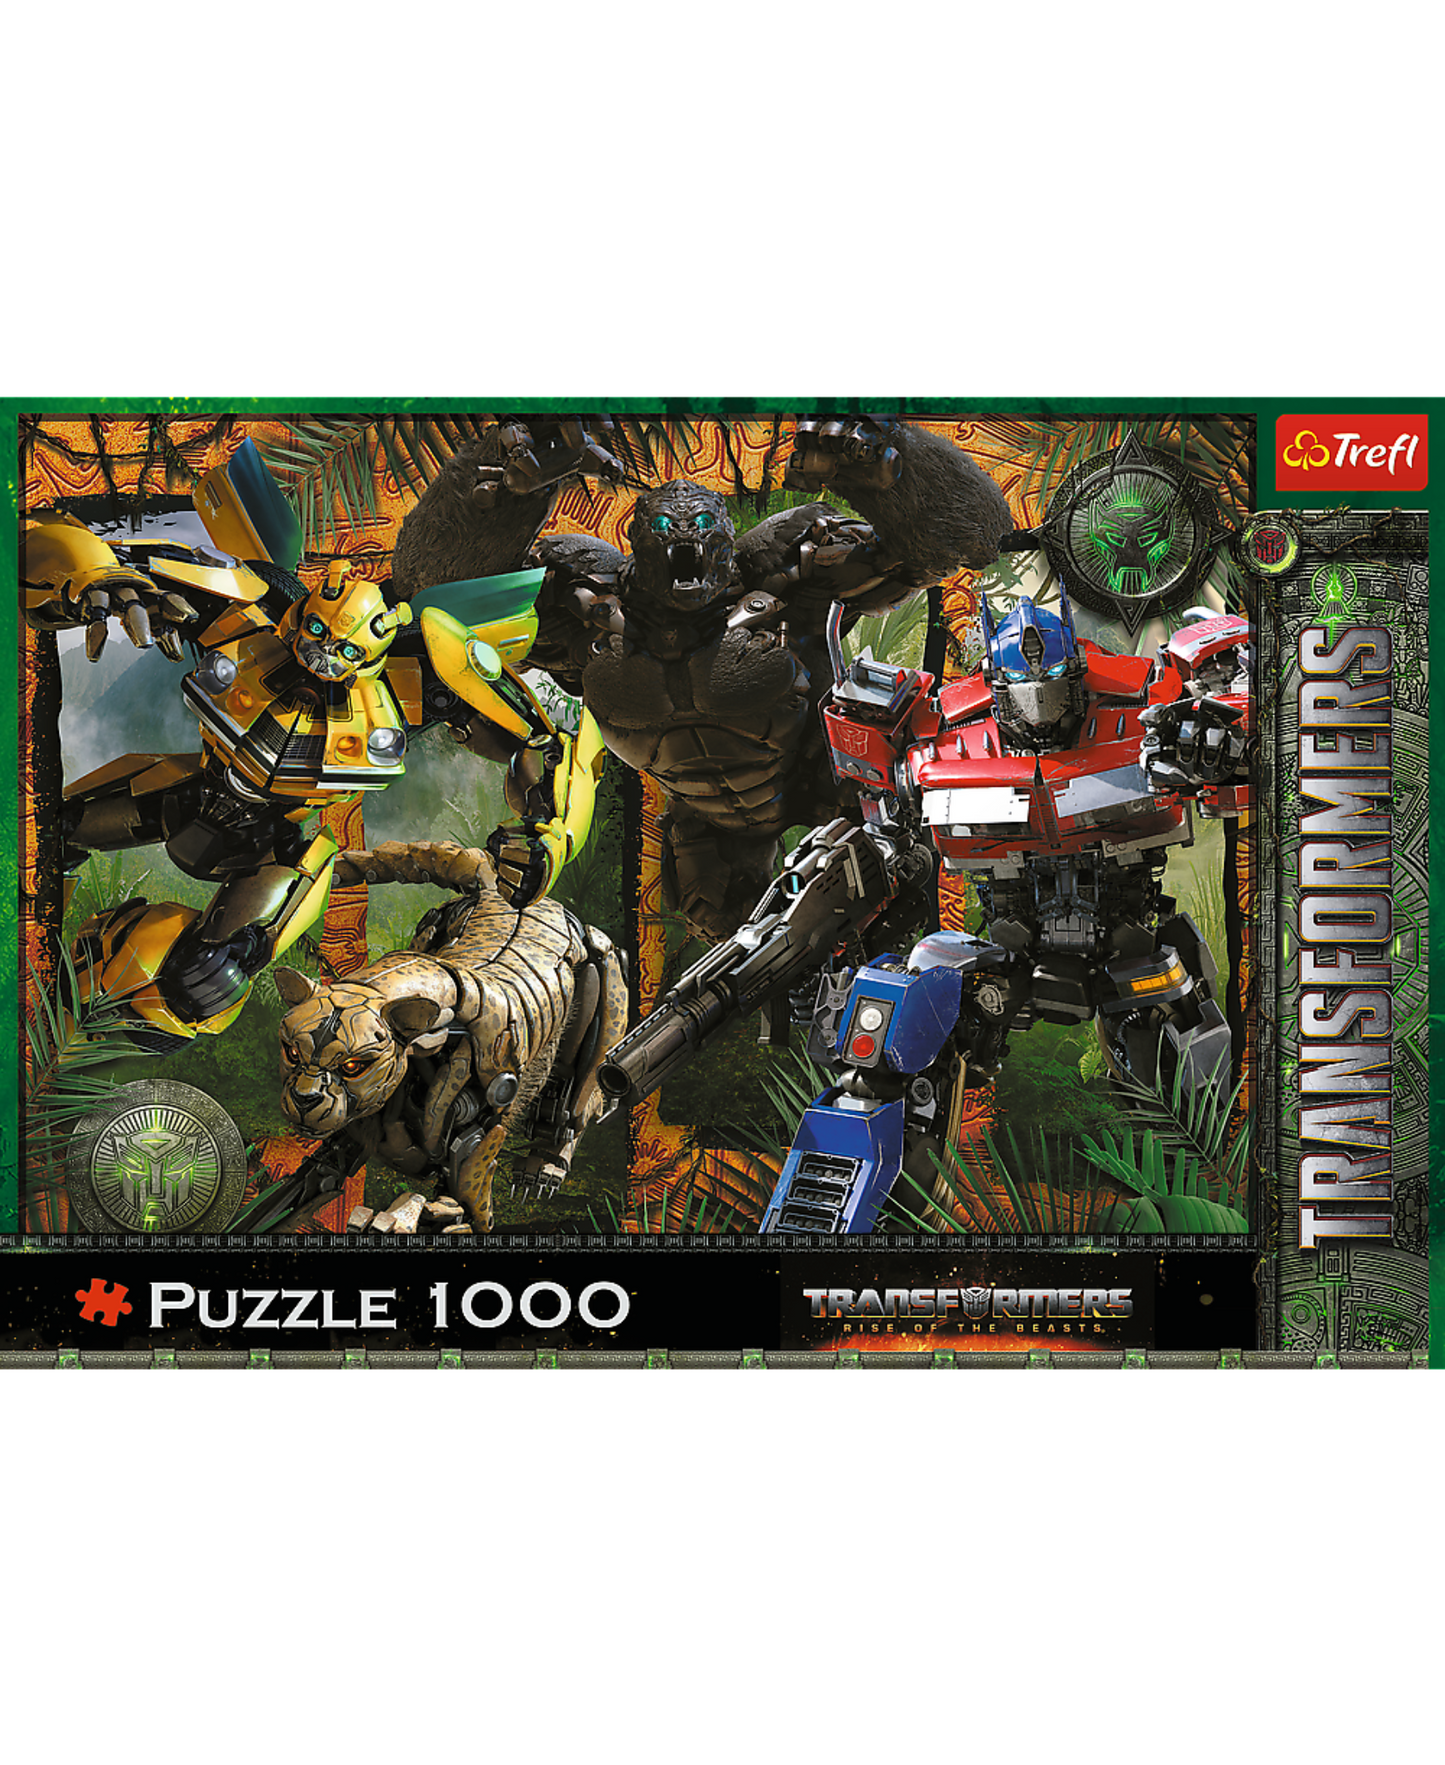 Transformers: Rise of the Beast 1000pc Puzzle